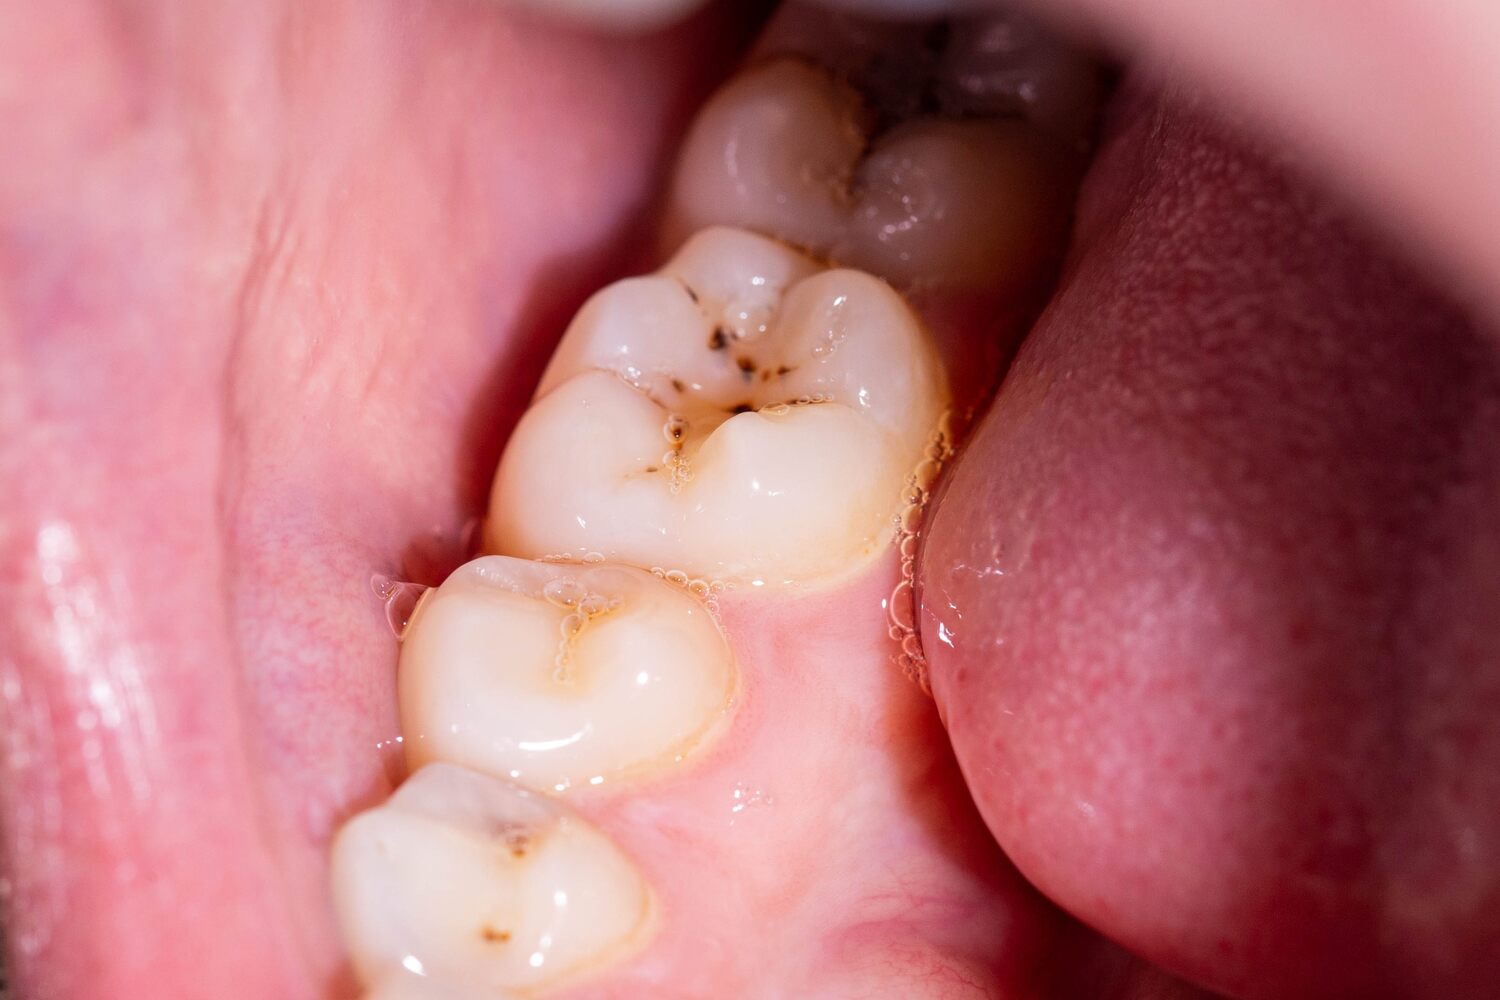 Teeth with decay